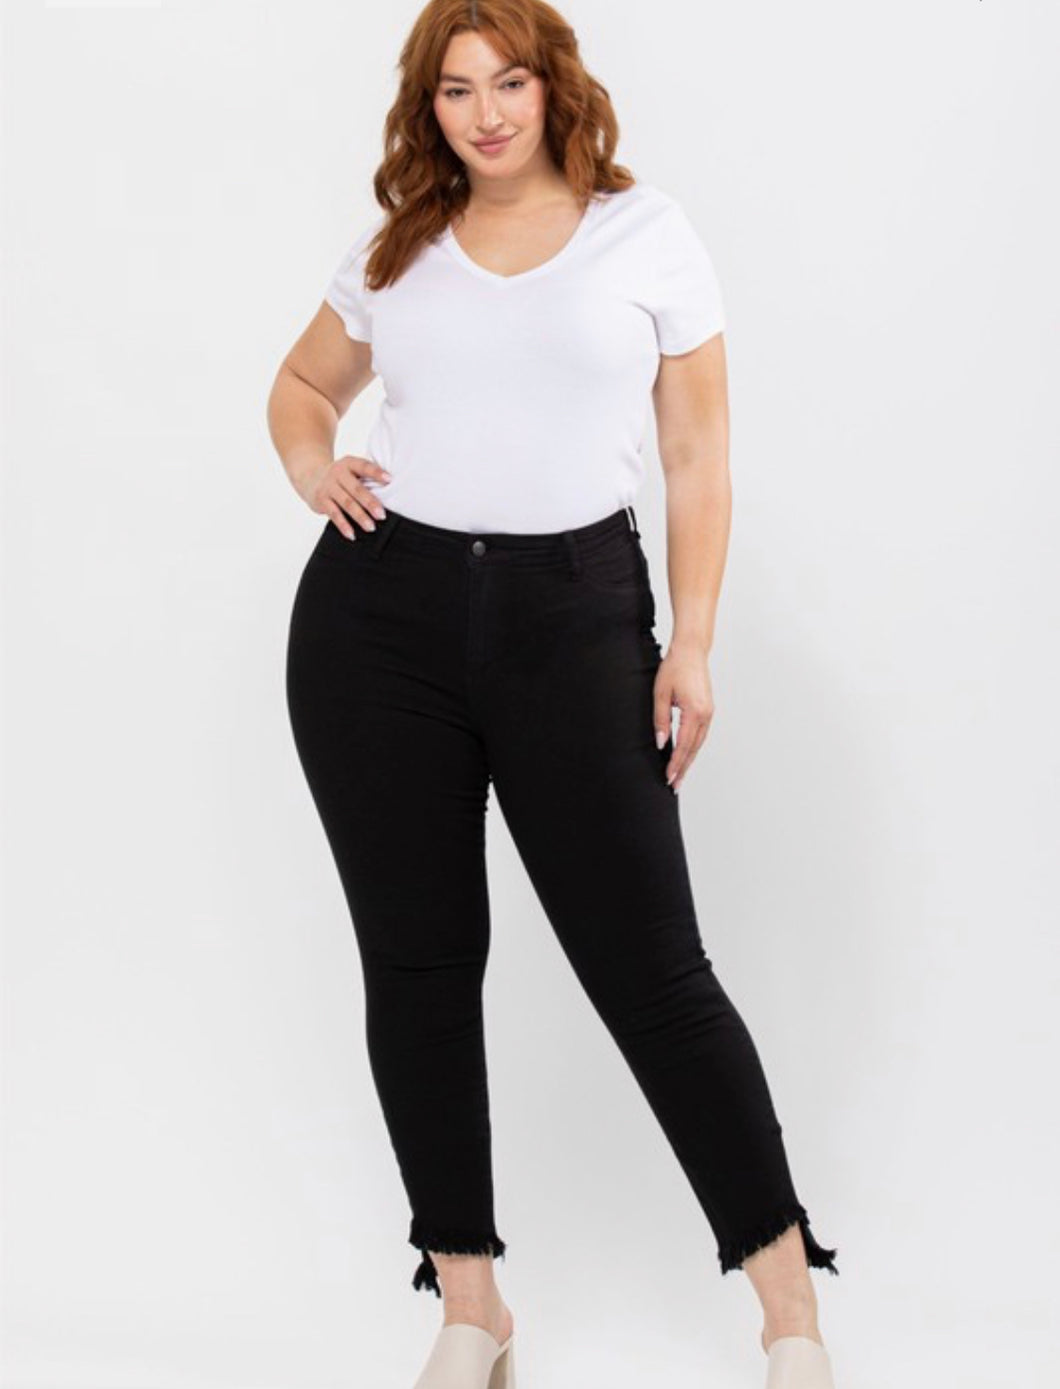 Curvy Gal Black Jeans with Fringe